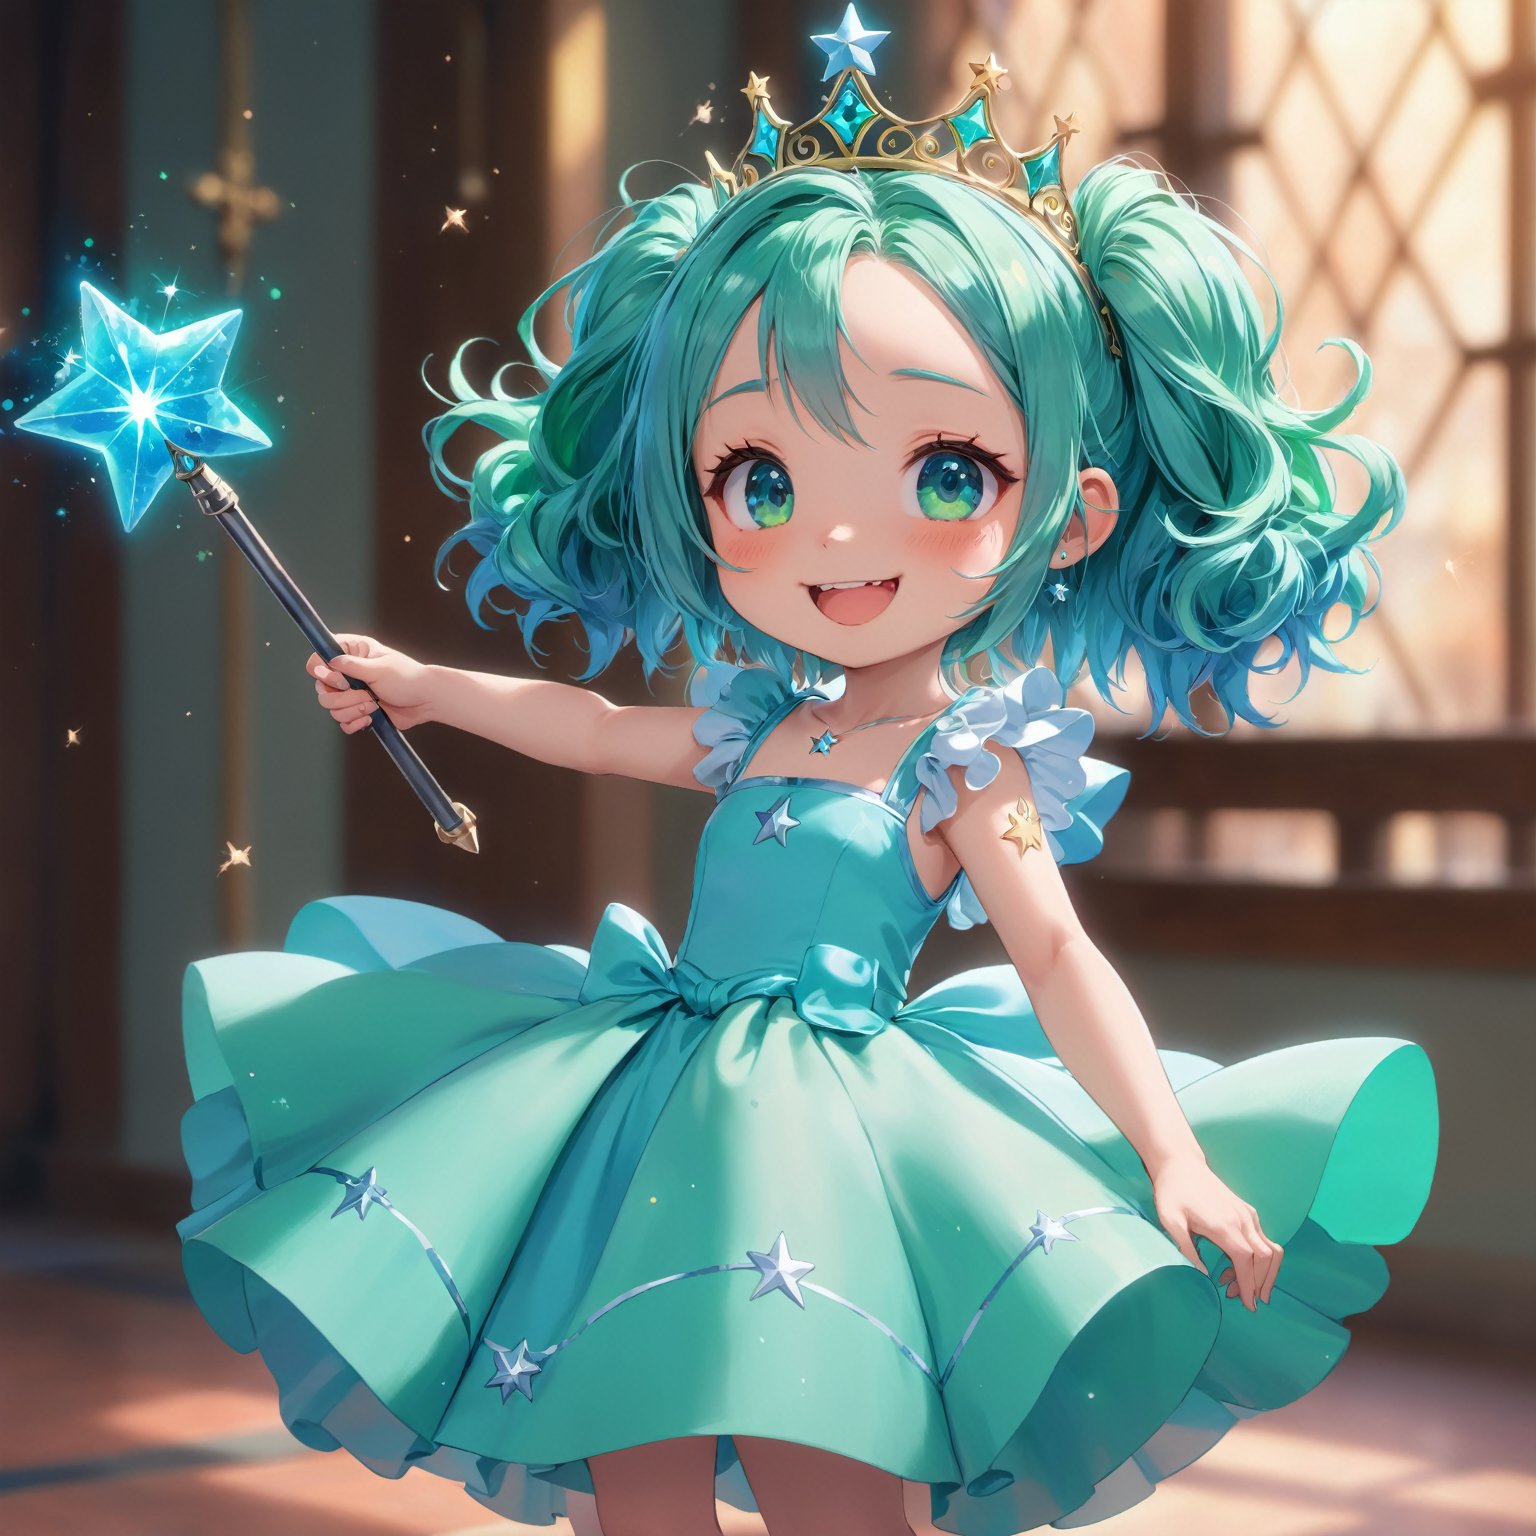 adorable_eyes, mischievous_smile, perfect hands, charming_outfit, fluffy_pet, kawaii_pose, pastel_background, star-shaped_weapon, magic wand, blue green hair, princess tiara, blue green dress, masterpiece, best quality, highly detailed, sharp focus, dynamic lighting, vivid colors, texture detail, particle effects, storytelling elements, narrative flair, 16k, UE5, HDR, subject-background isolation



,Anime 